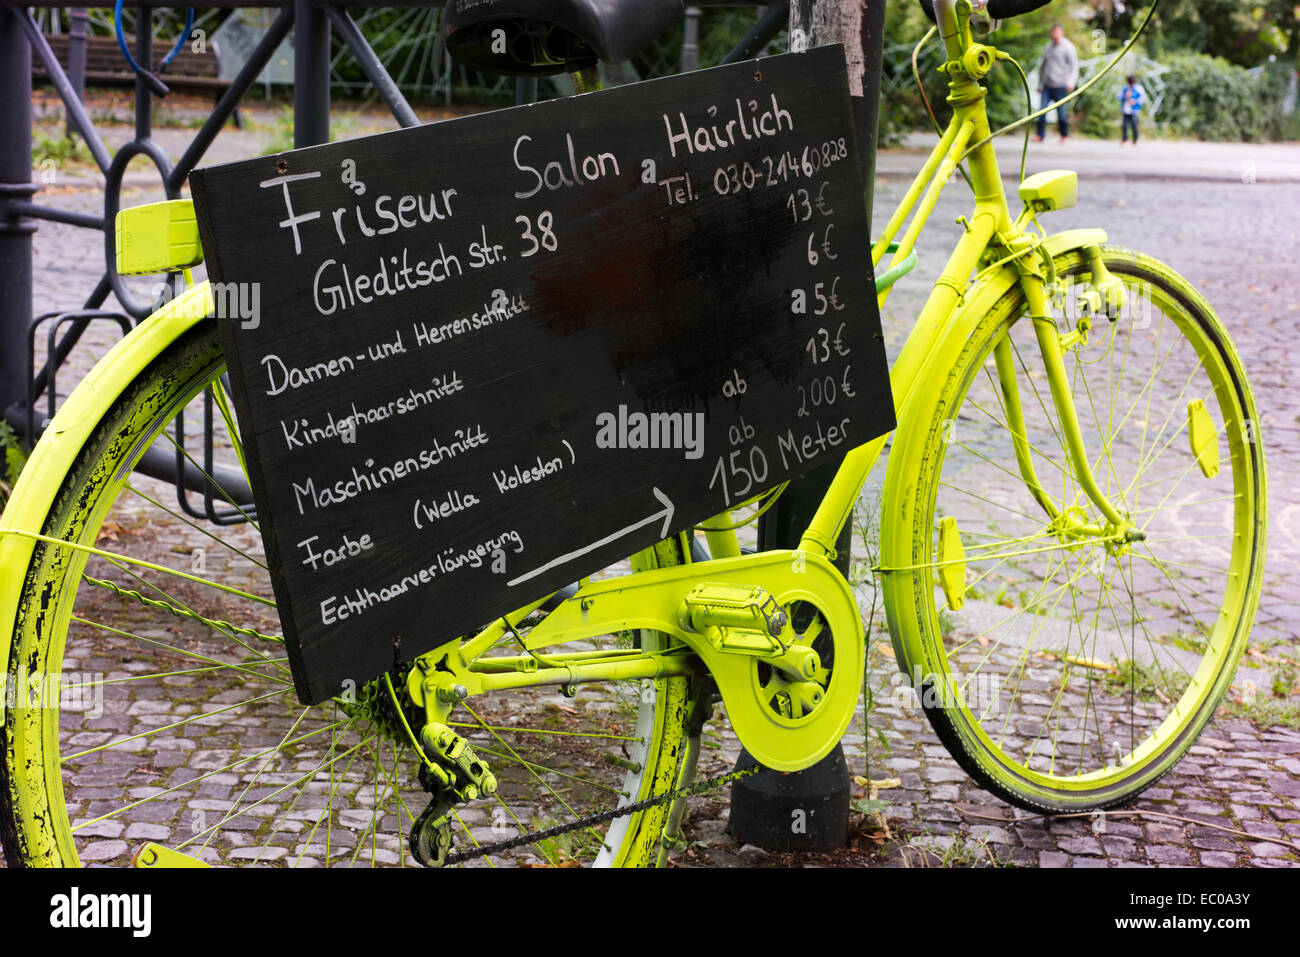 Luminescent paint on a bike used as part of a promotion for a Berlin hairdresser. Stock Photo